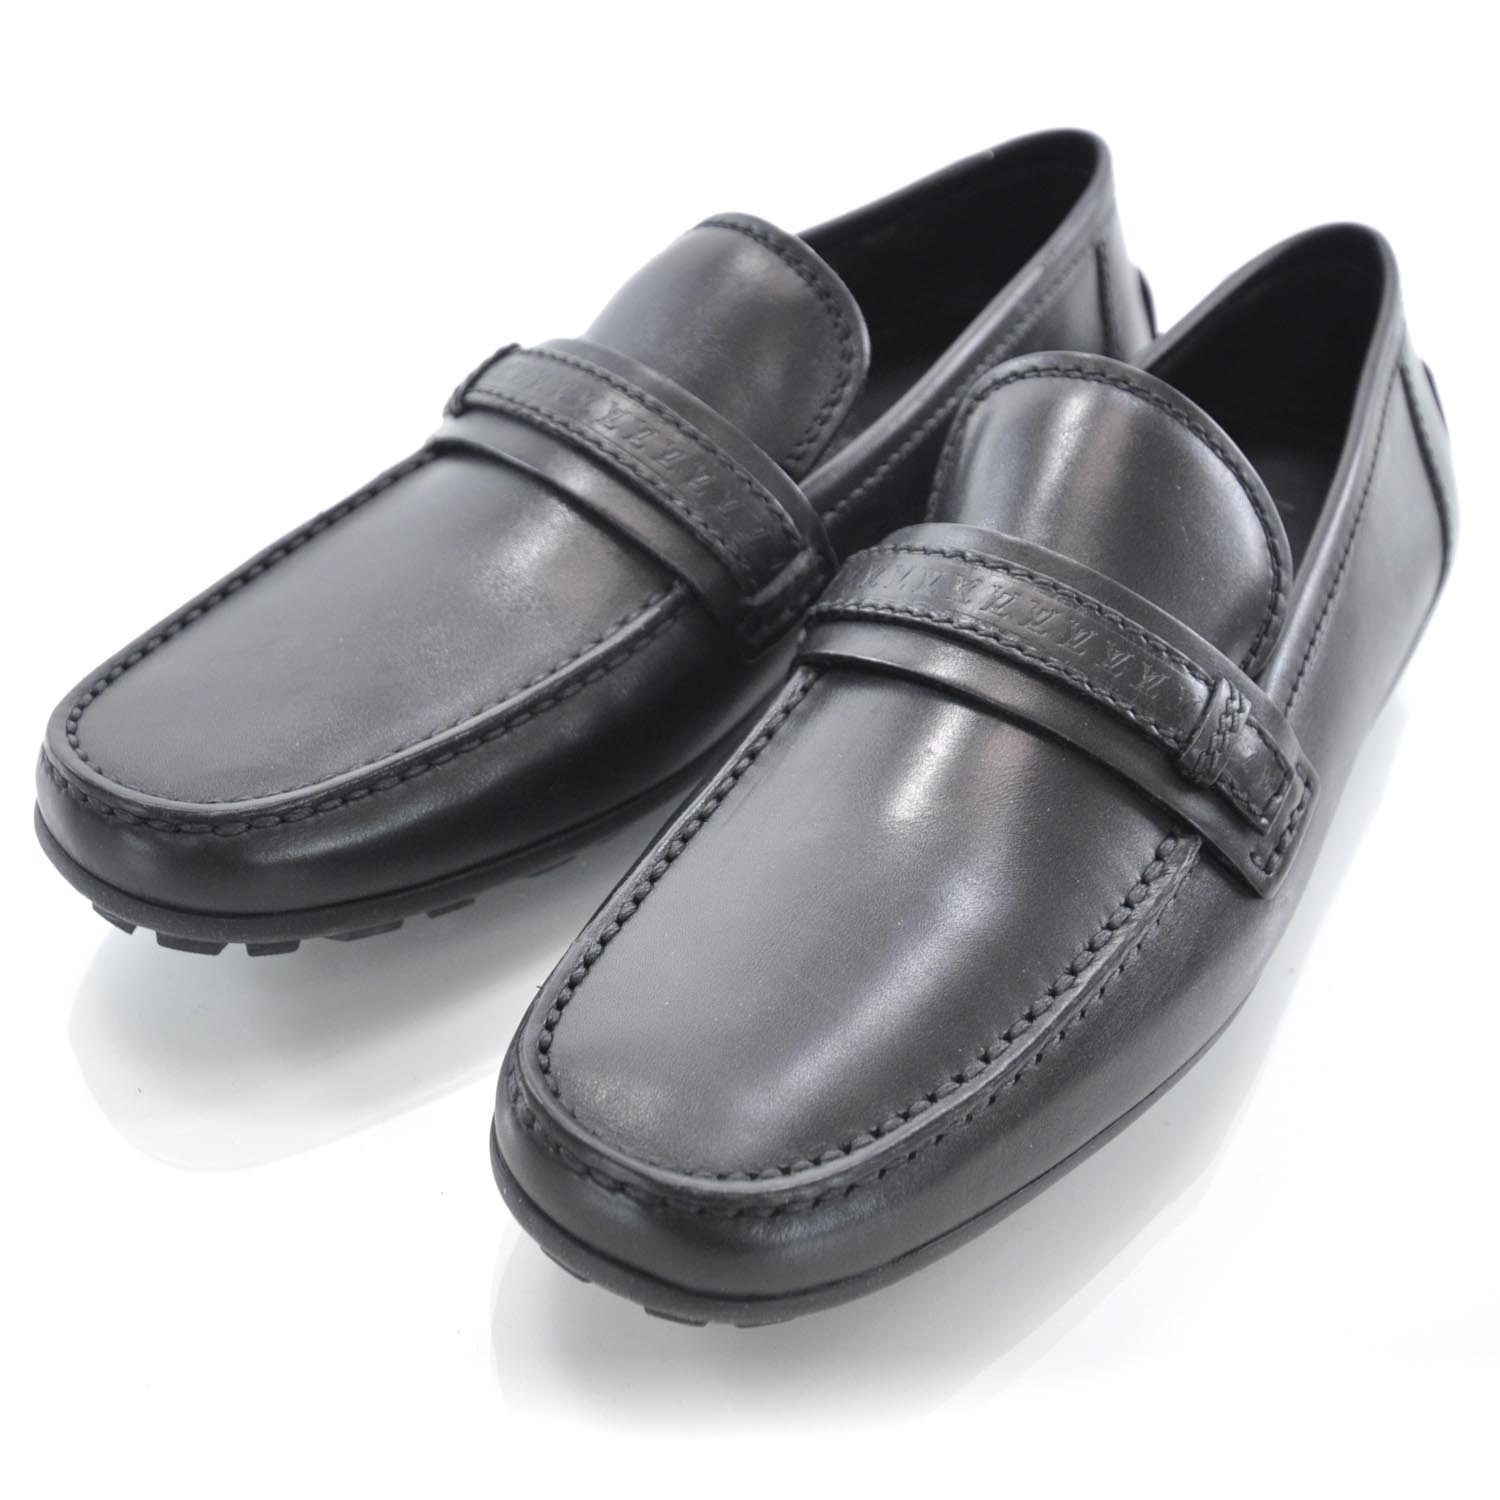 LOUIS VUITTON Leather Loafers Shoes 7 Black 31562